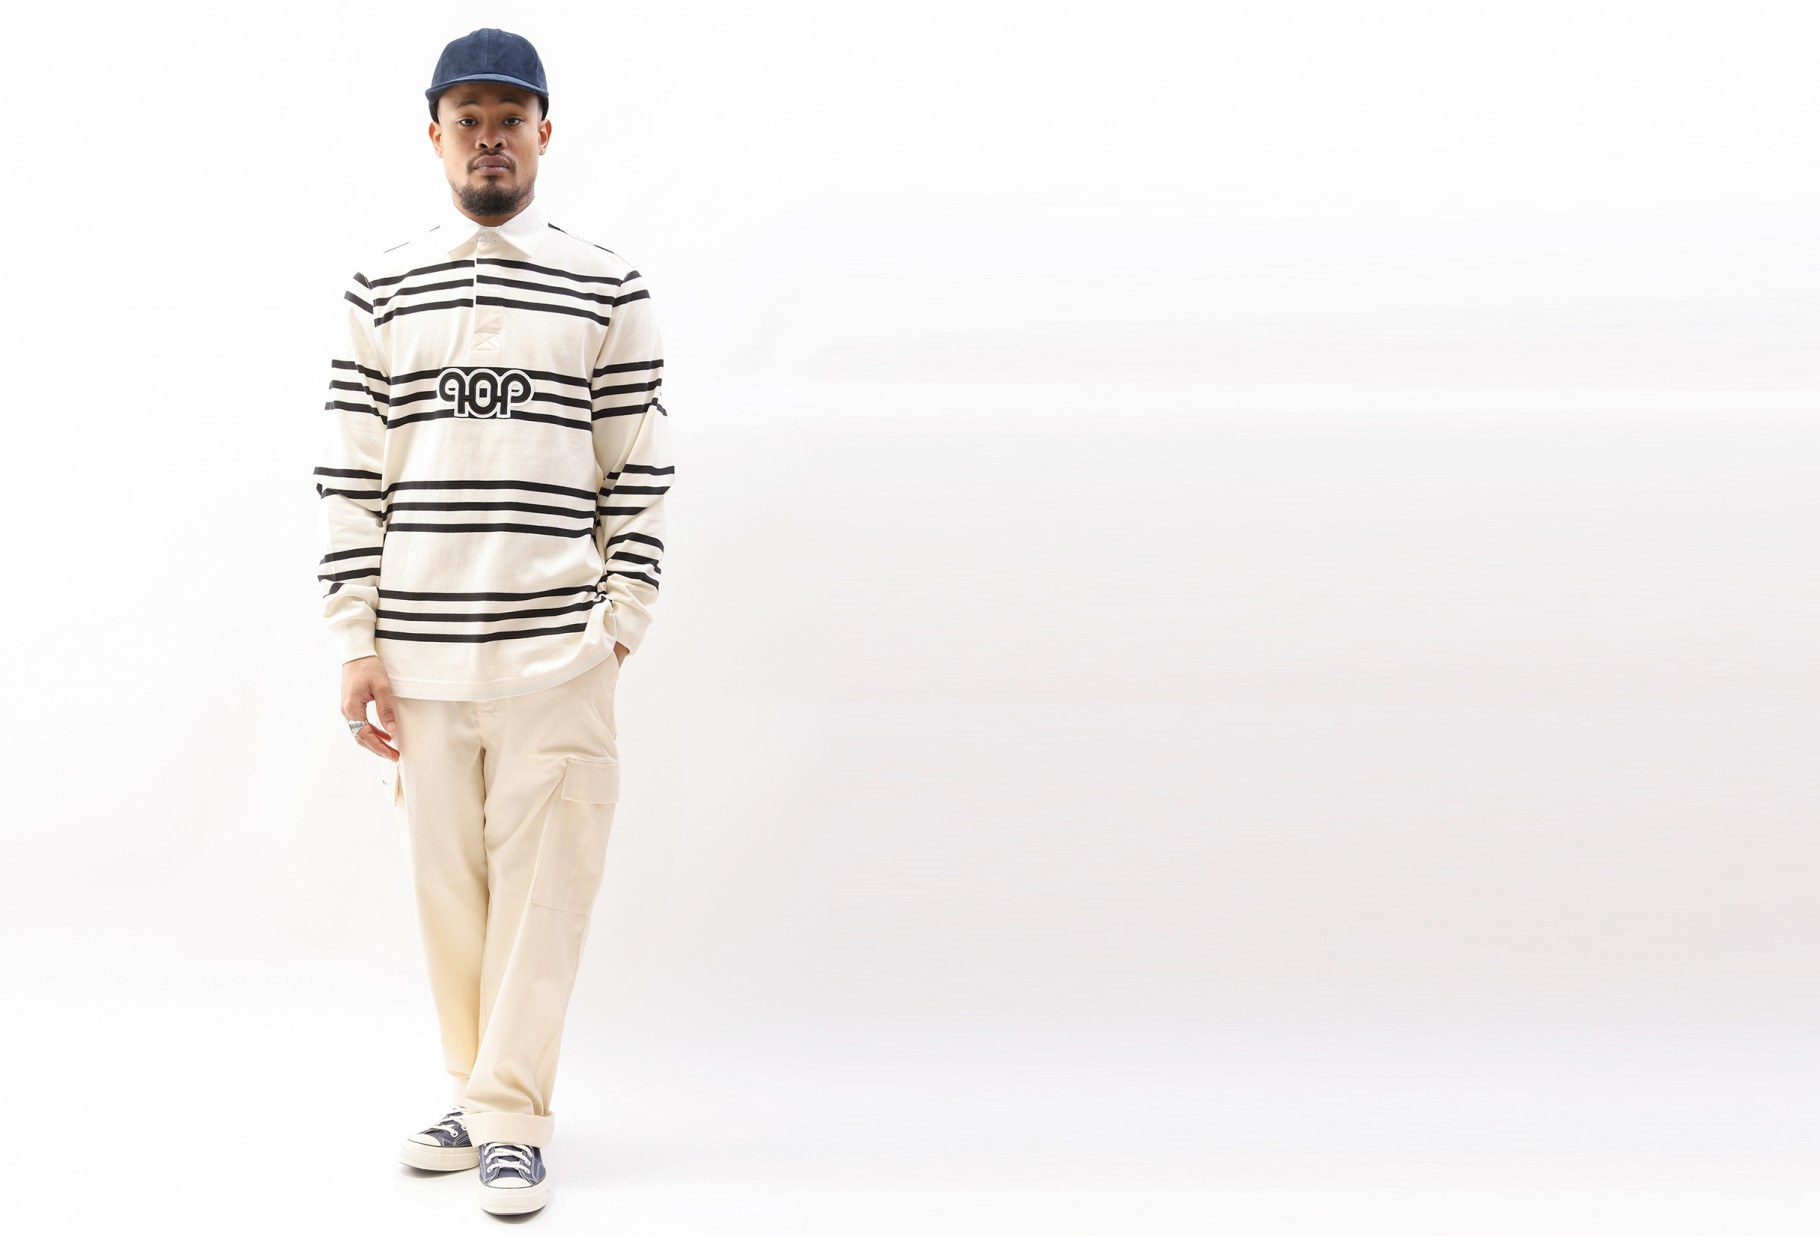 POP TRADING COMPANY / Pub striped rugby polo Black/off white